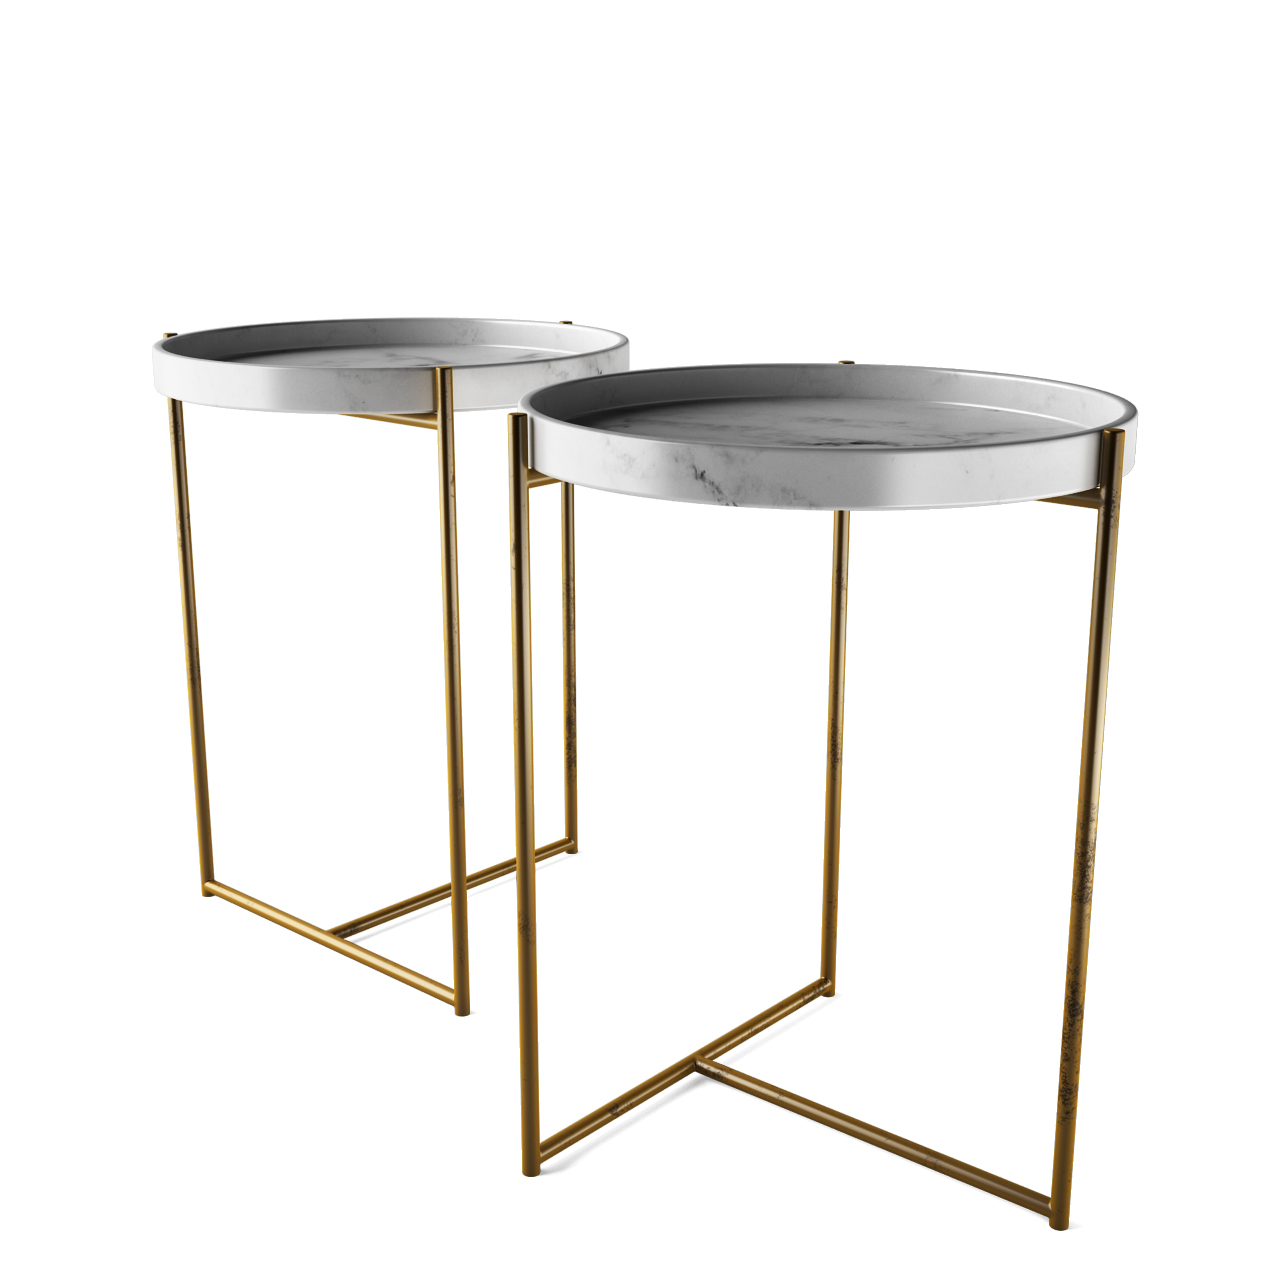 Oliver Tray Table by Evie Group